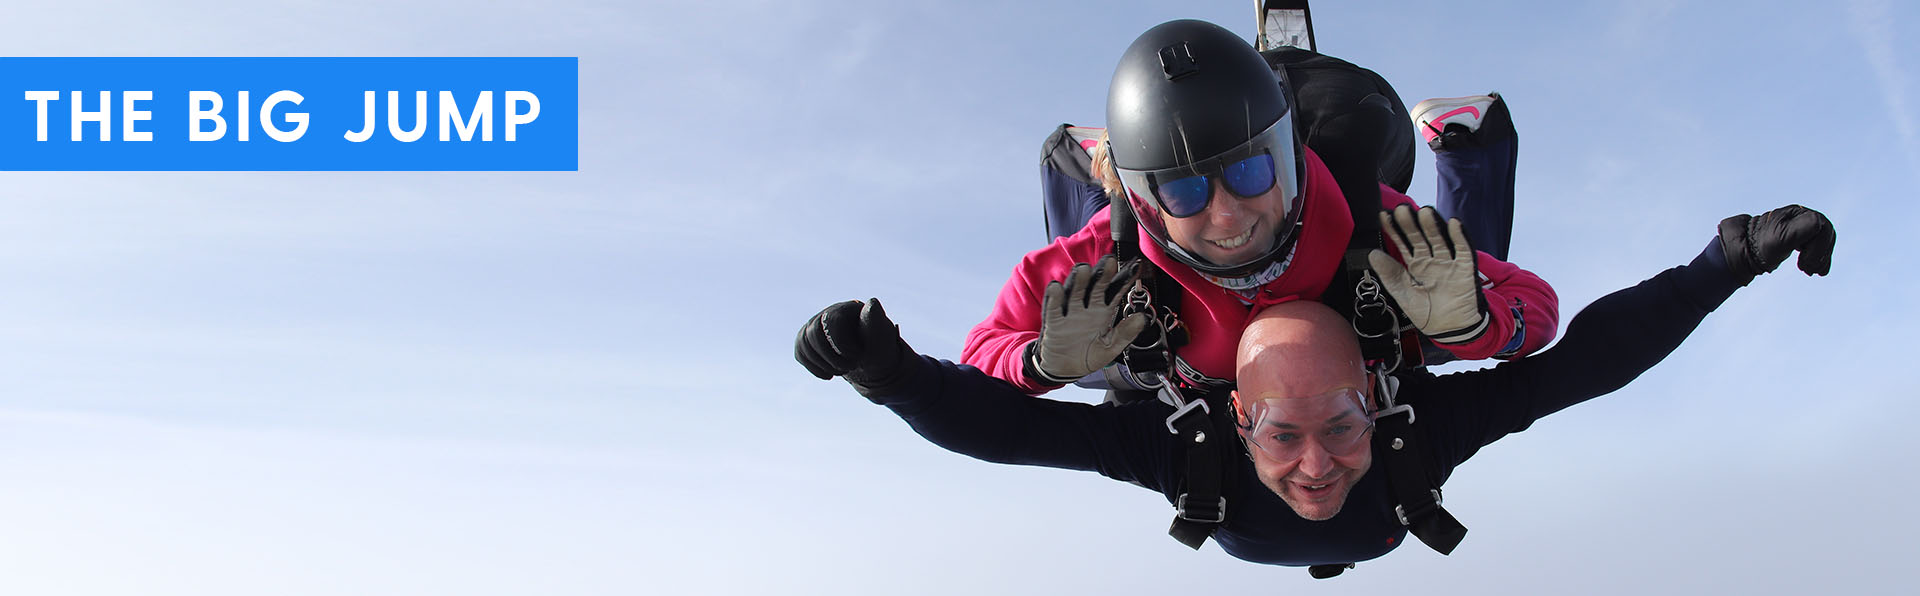 Jumping out of a plane at 14,000ft!